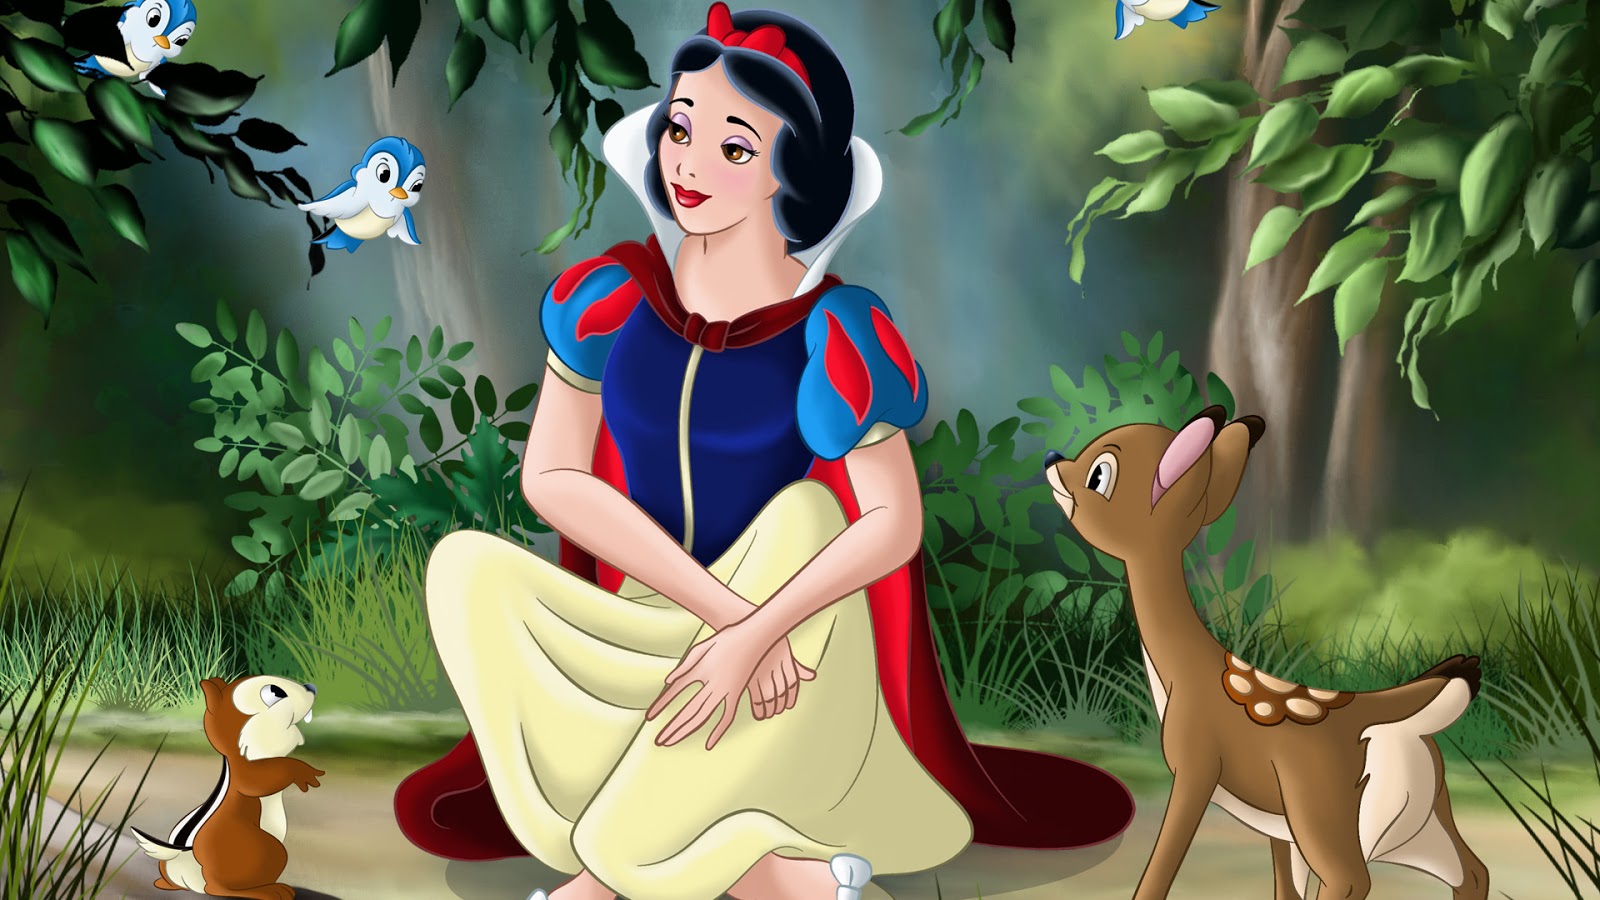 200+] Snow White Background s | Wallpapers.com